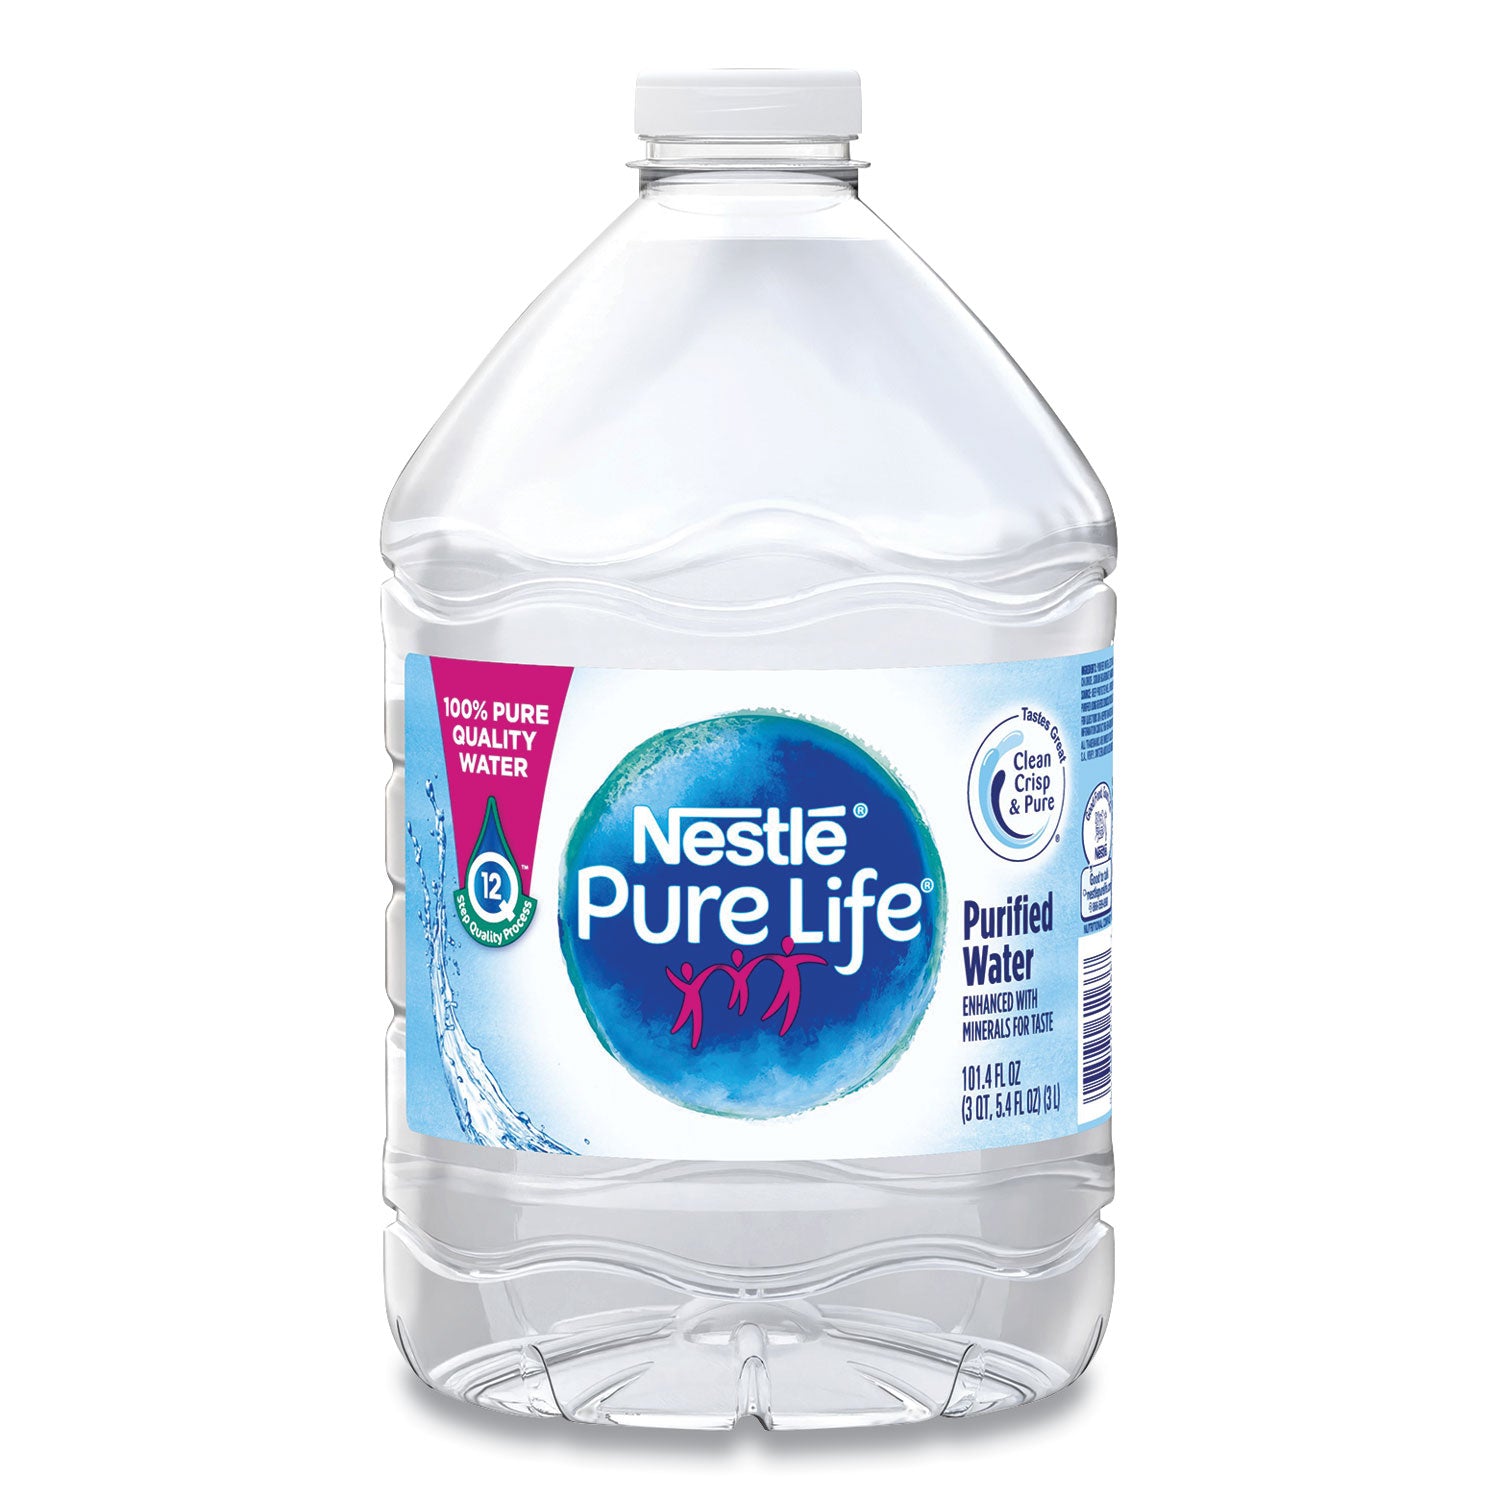 pure-life-purified-water-1014-oz-bottle-6-pack_nle12386172 - 1